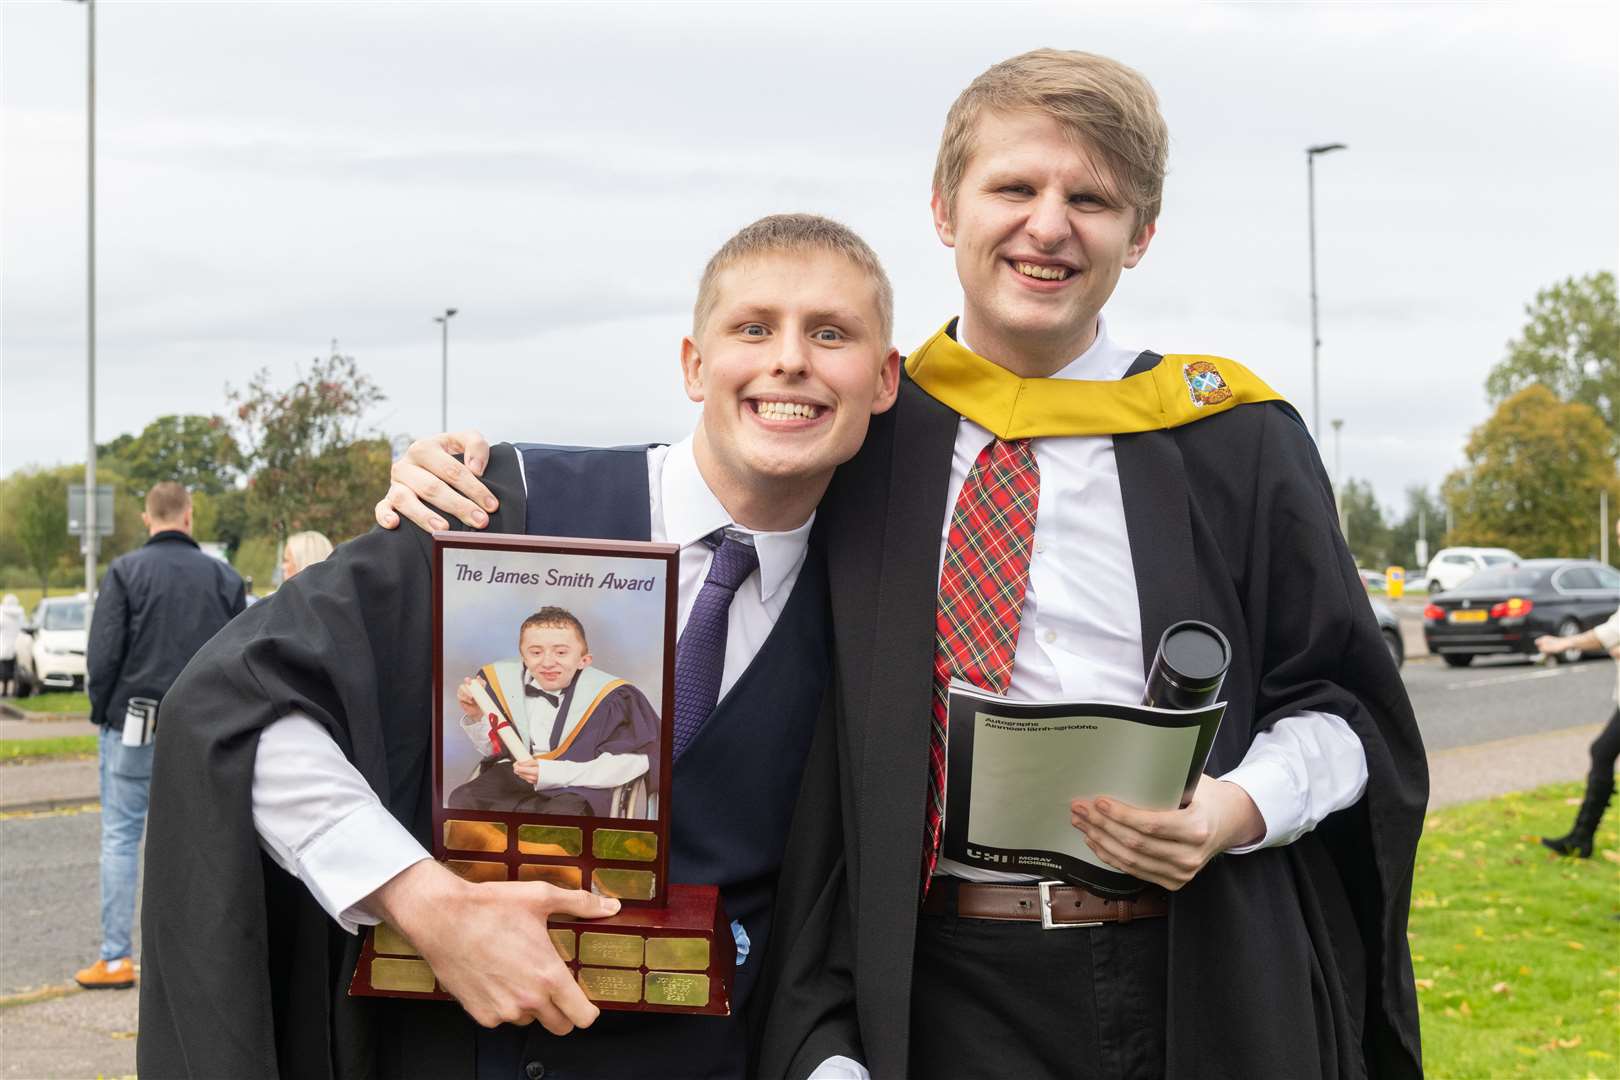 Brothers Robin Kingsley Heady, Higher National Certificate in Acting and Performance, and Jonathan Lester Heady who received the James Smith Award and a College Certificate in Preparing to Work...UHI Moray's Graduations at Elgin Town Hall...Picture: Beth Taylor.